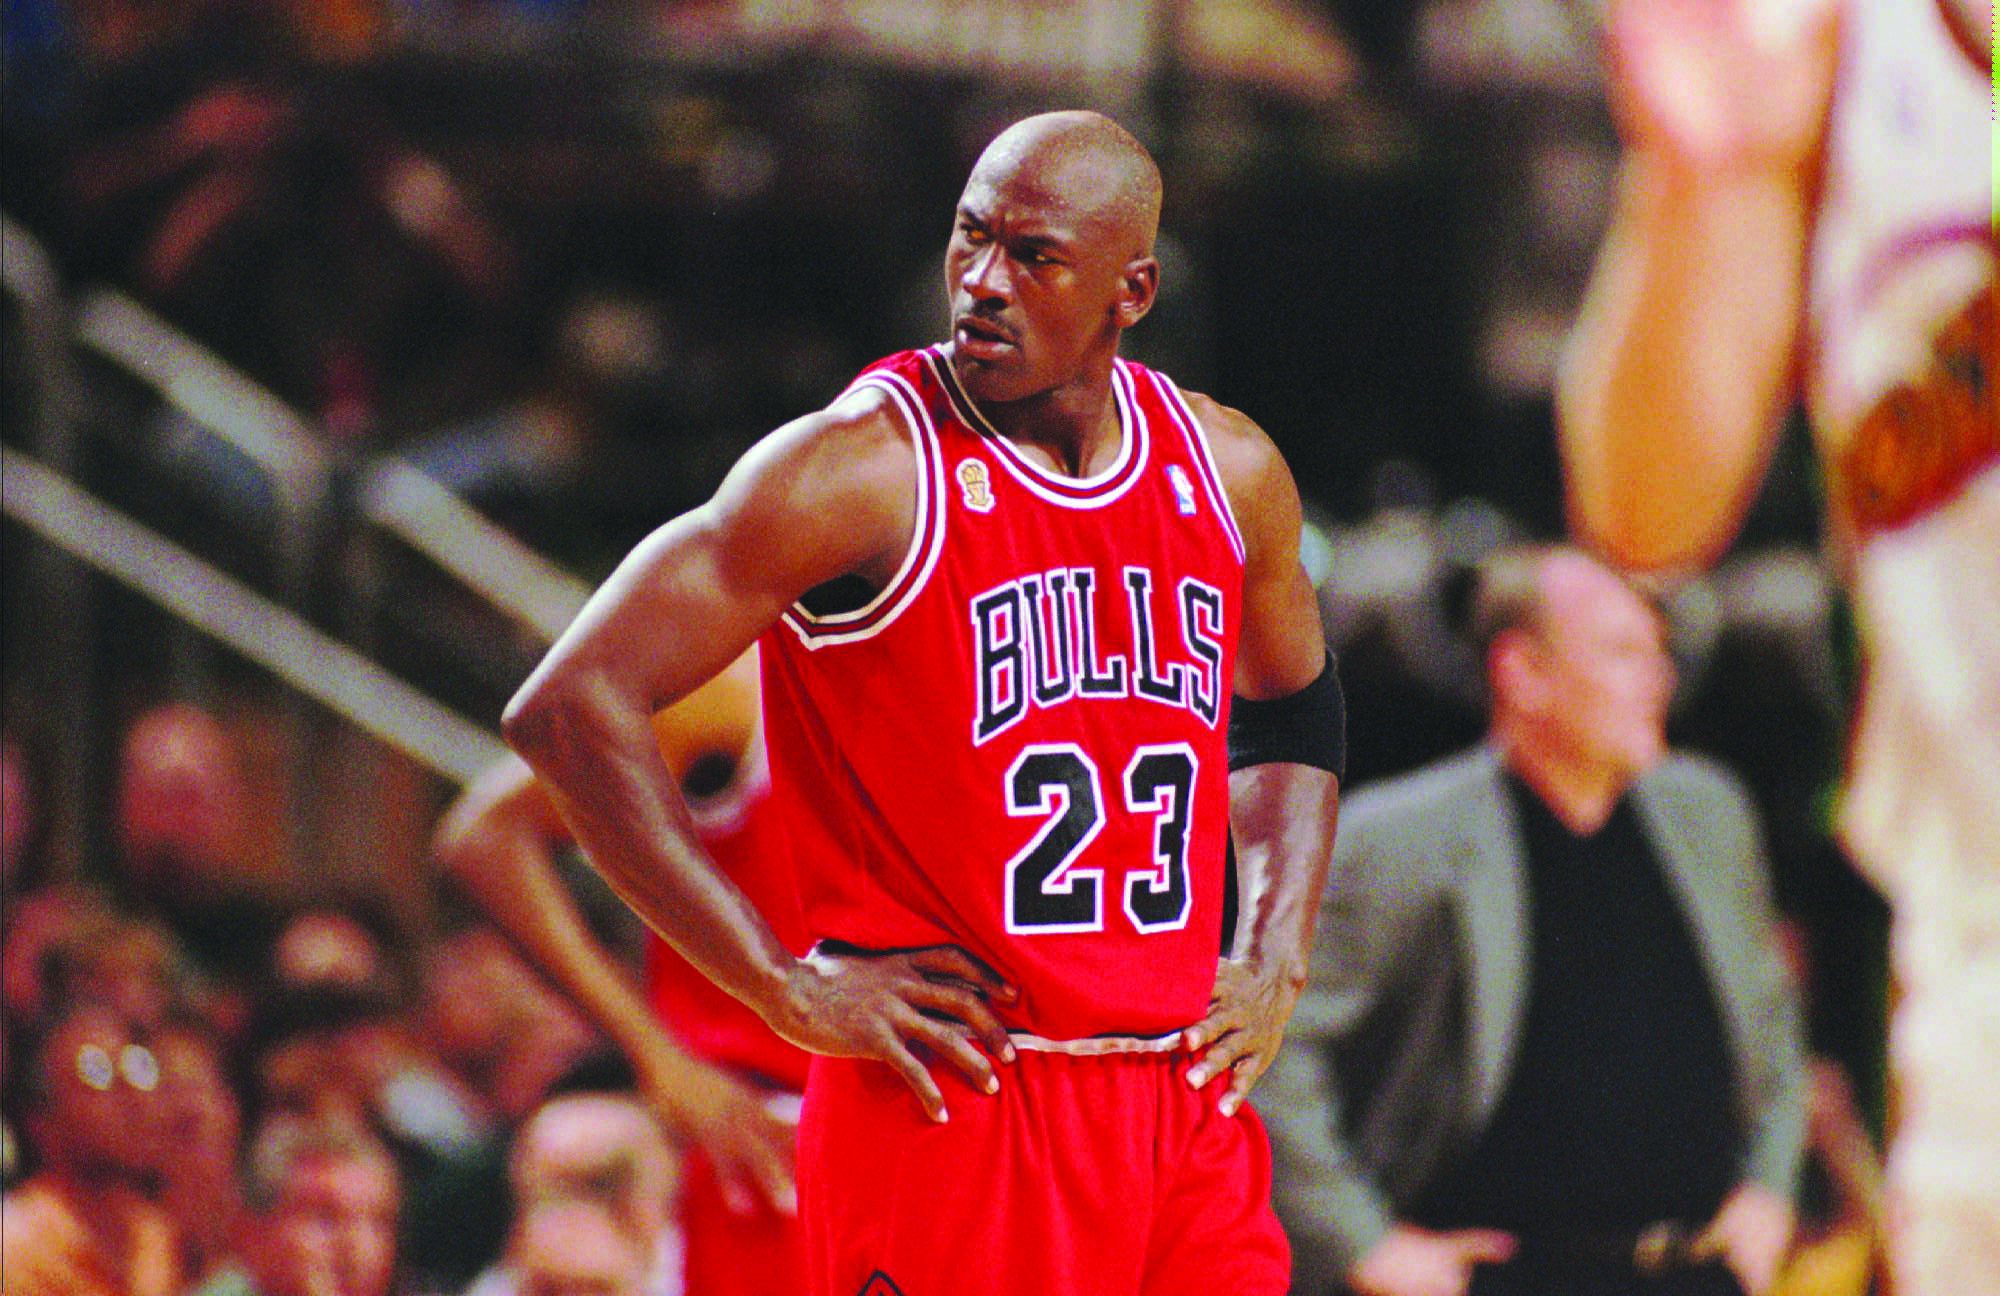 Chicago Bulls' Michael Jordan pauses in the third quarter in Game 5 of the NBA Finals against the Seattle SuperSonics Friday, June 14, 1996 in Seattle. The Sonics beat the Bulls, 89-78. (AP Photo/Beth A. Keiser)